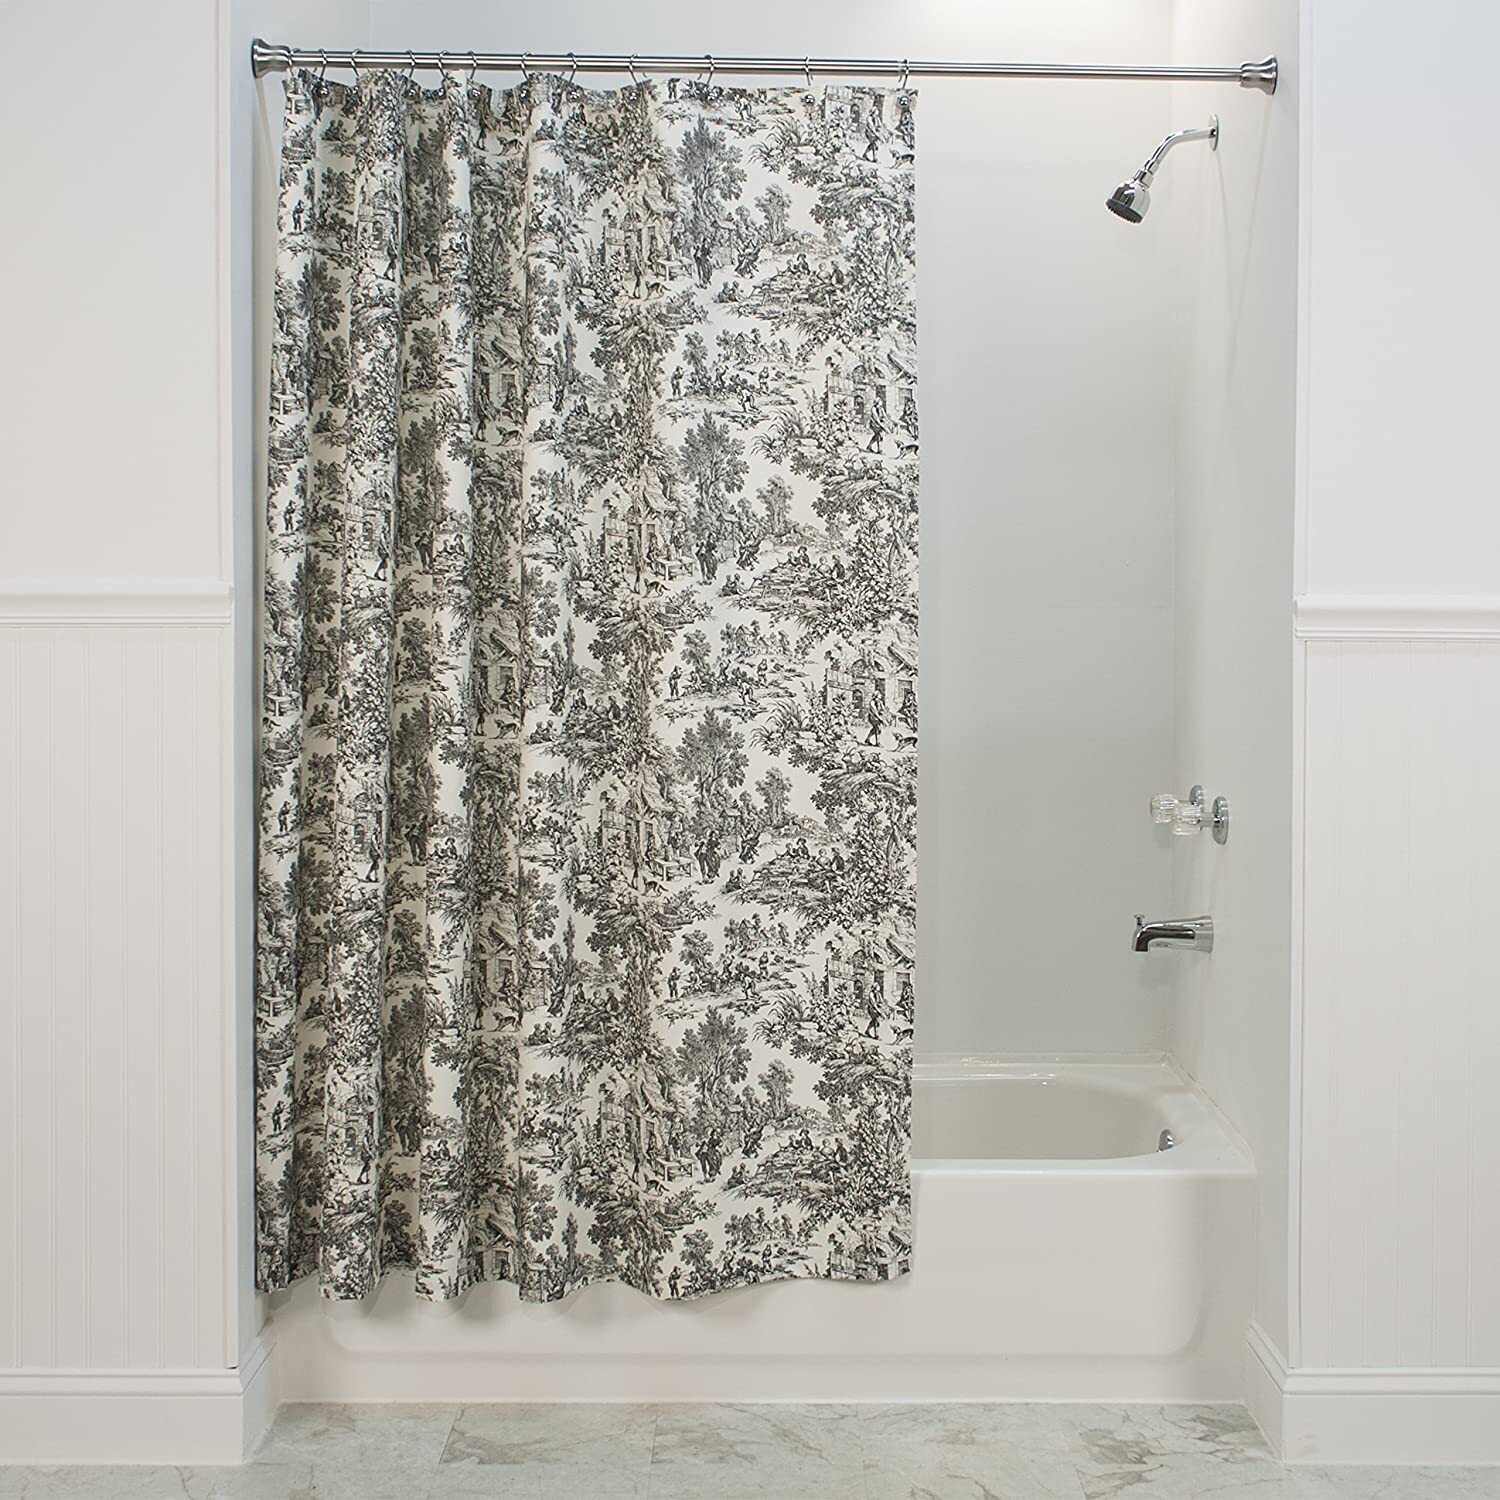 Toile Shower Curtain With Busy Pattern